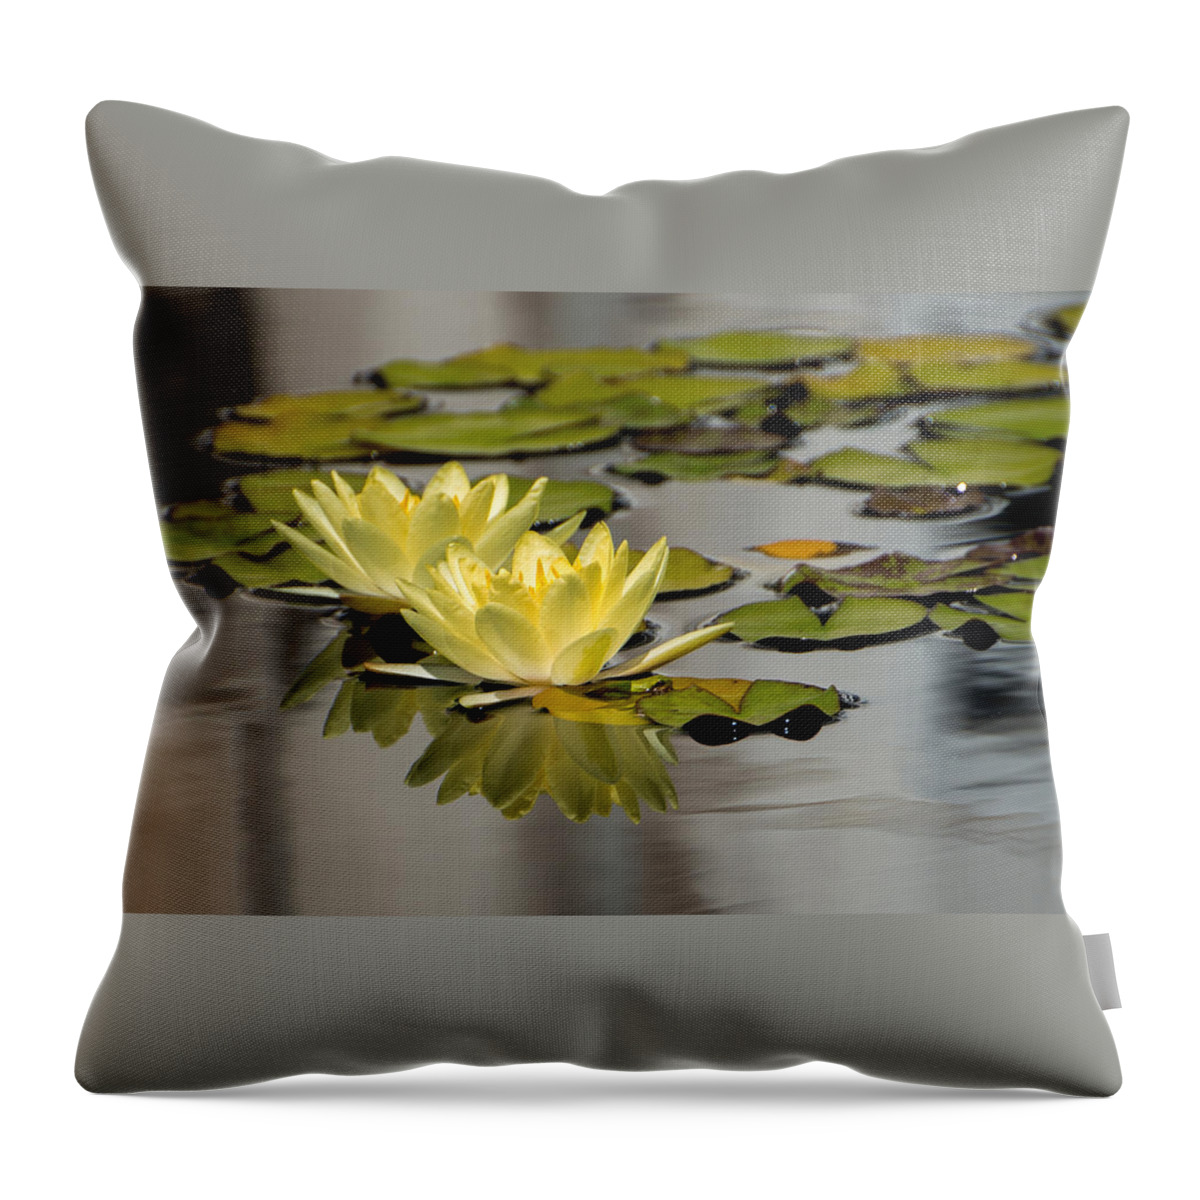 Waterlily Throw Pillow featuring the photograph Yellow Waterlily by Stacy Abbott